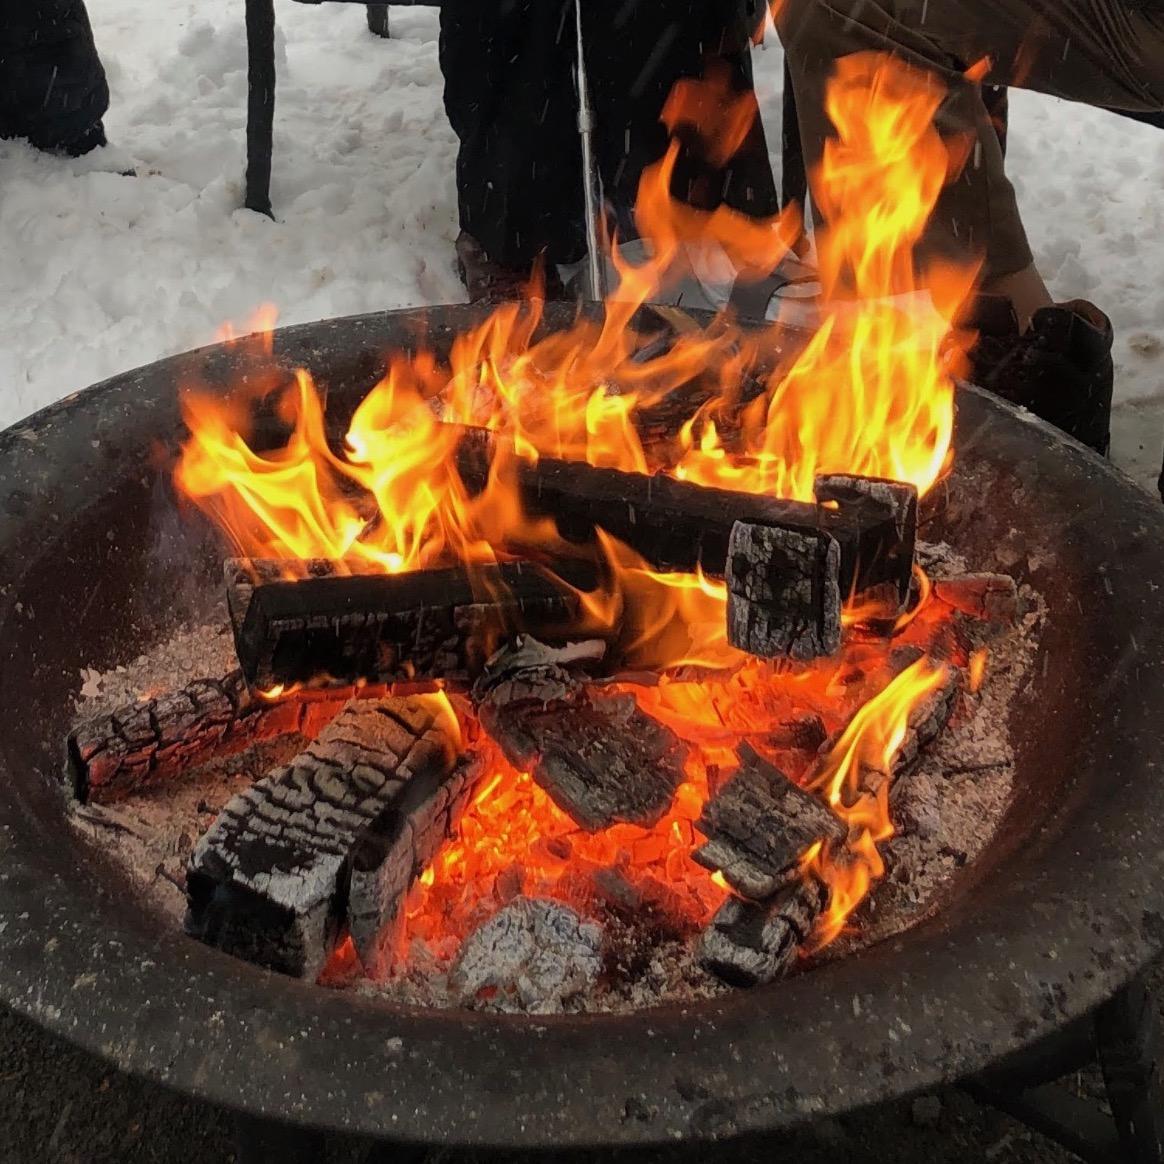 [ID: "Logs burning in a metal fire pit with snow in the background."]